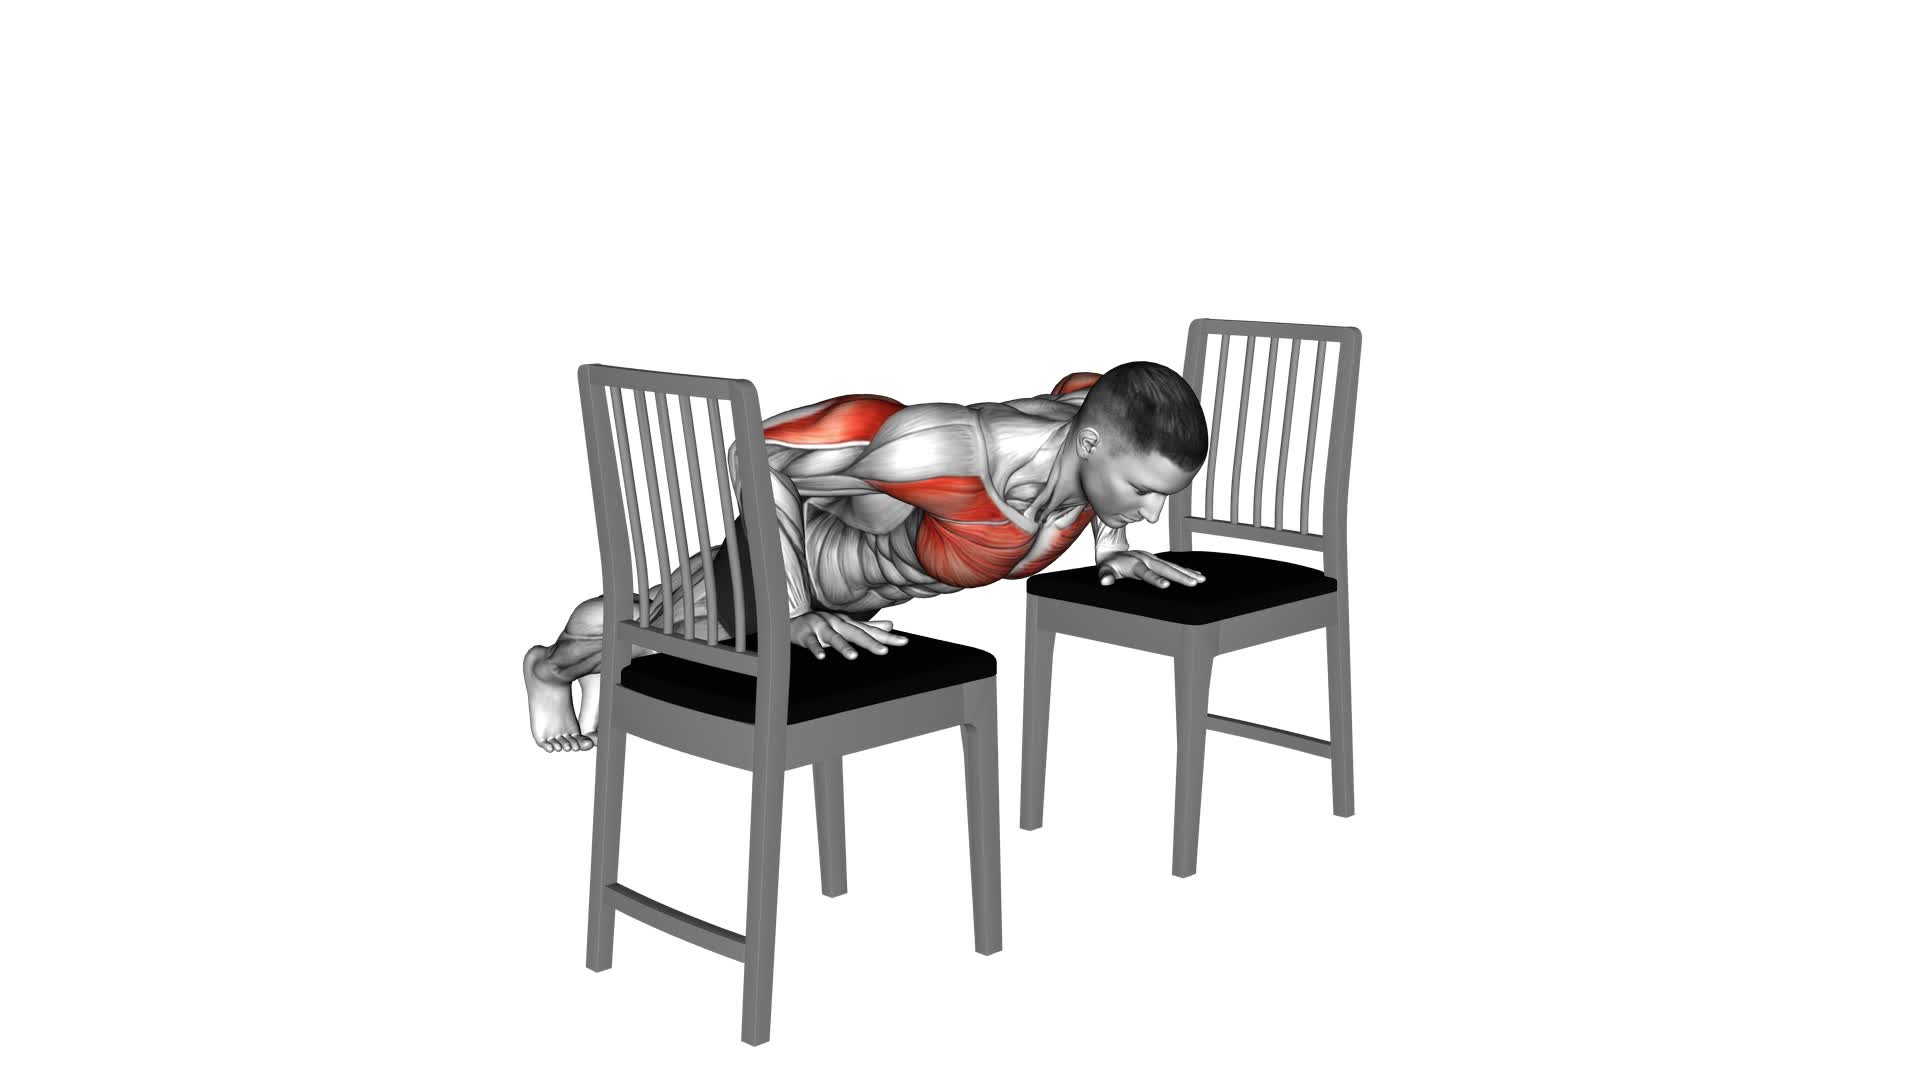 Incline Push-Up With Chair - Video Exercise Guide & Tips